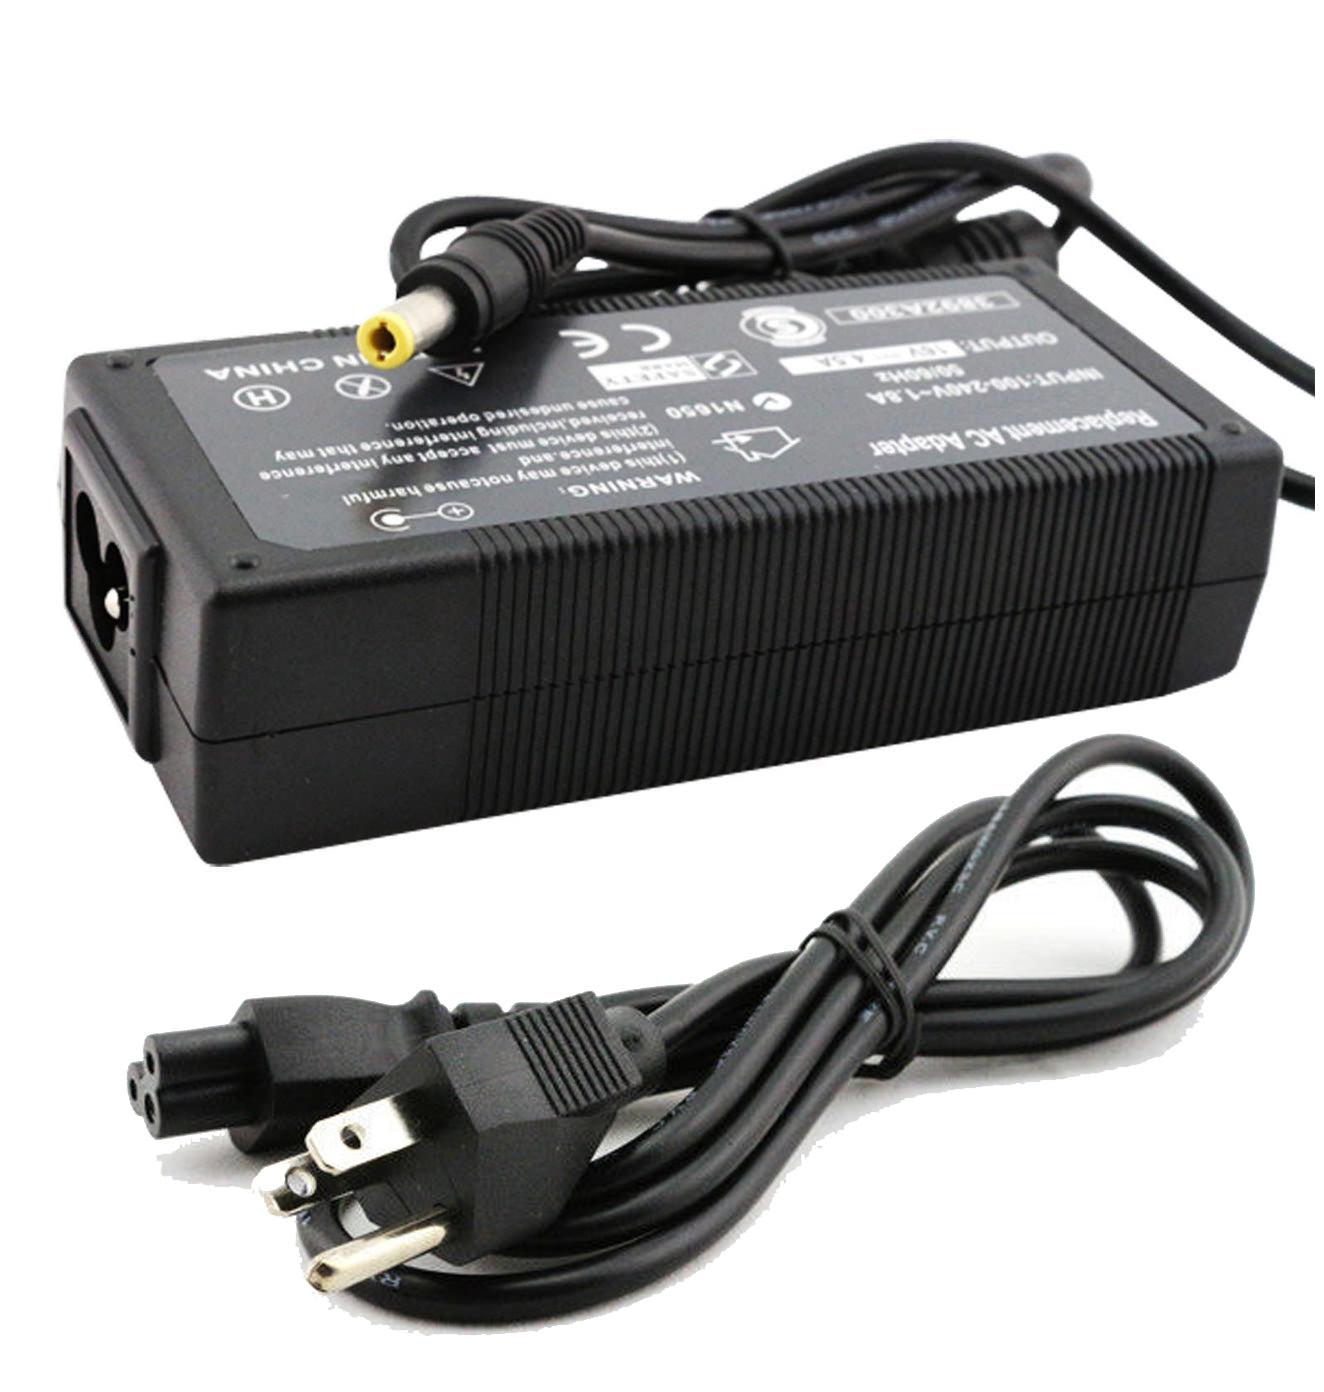 AC Adapter Charger for Panasonic Toughbook CF-Y7 Notebook.